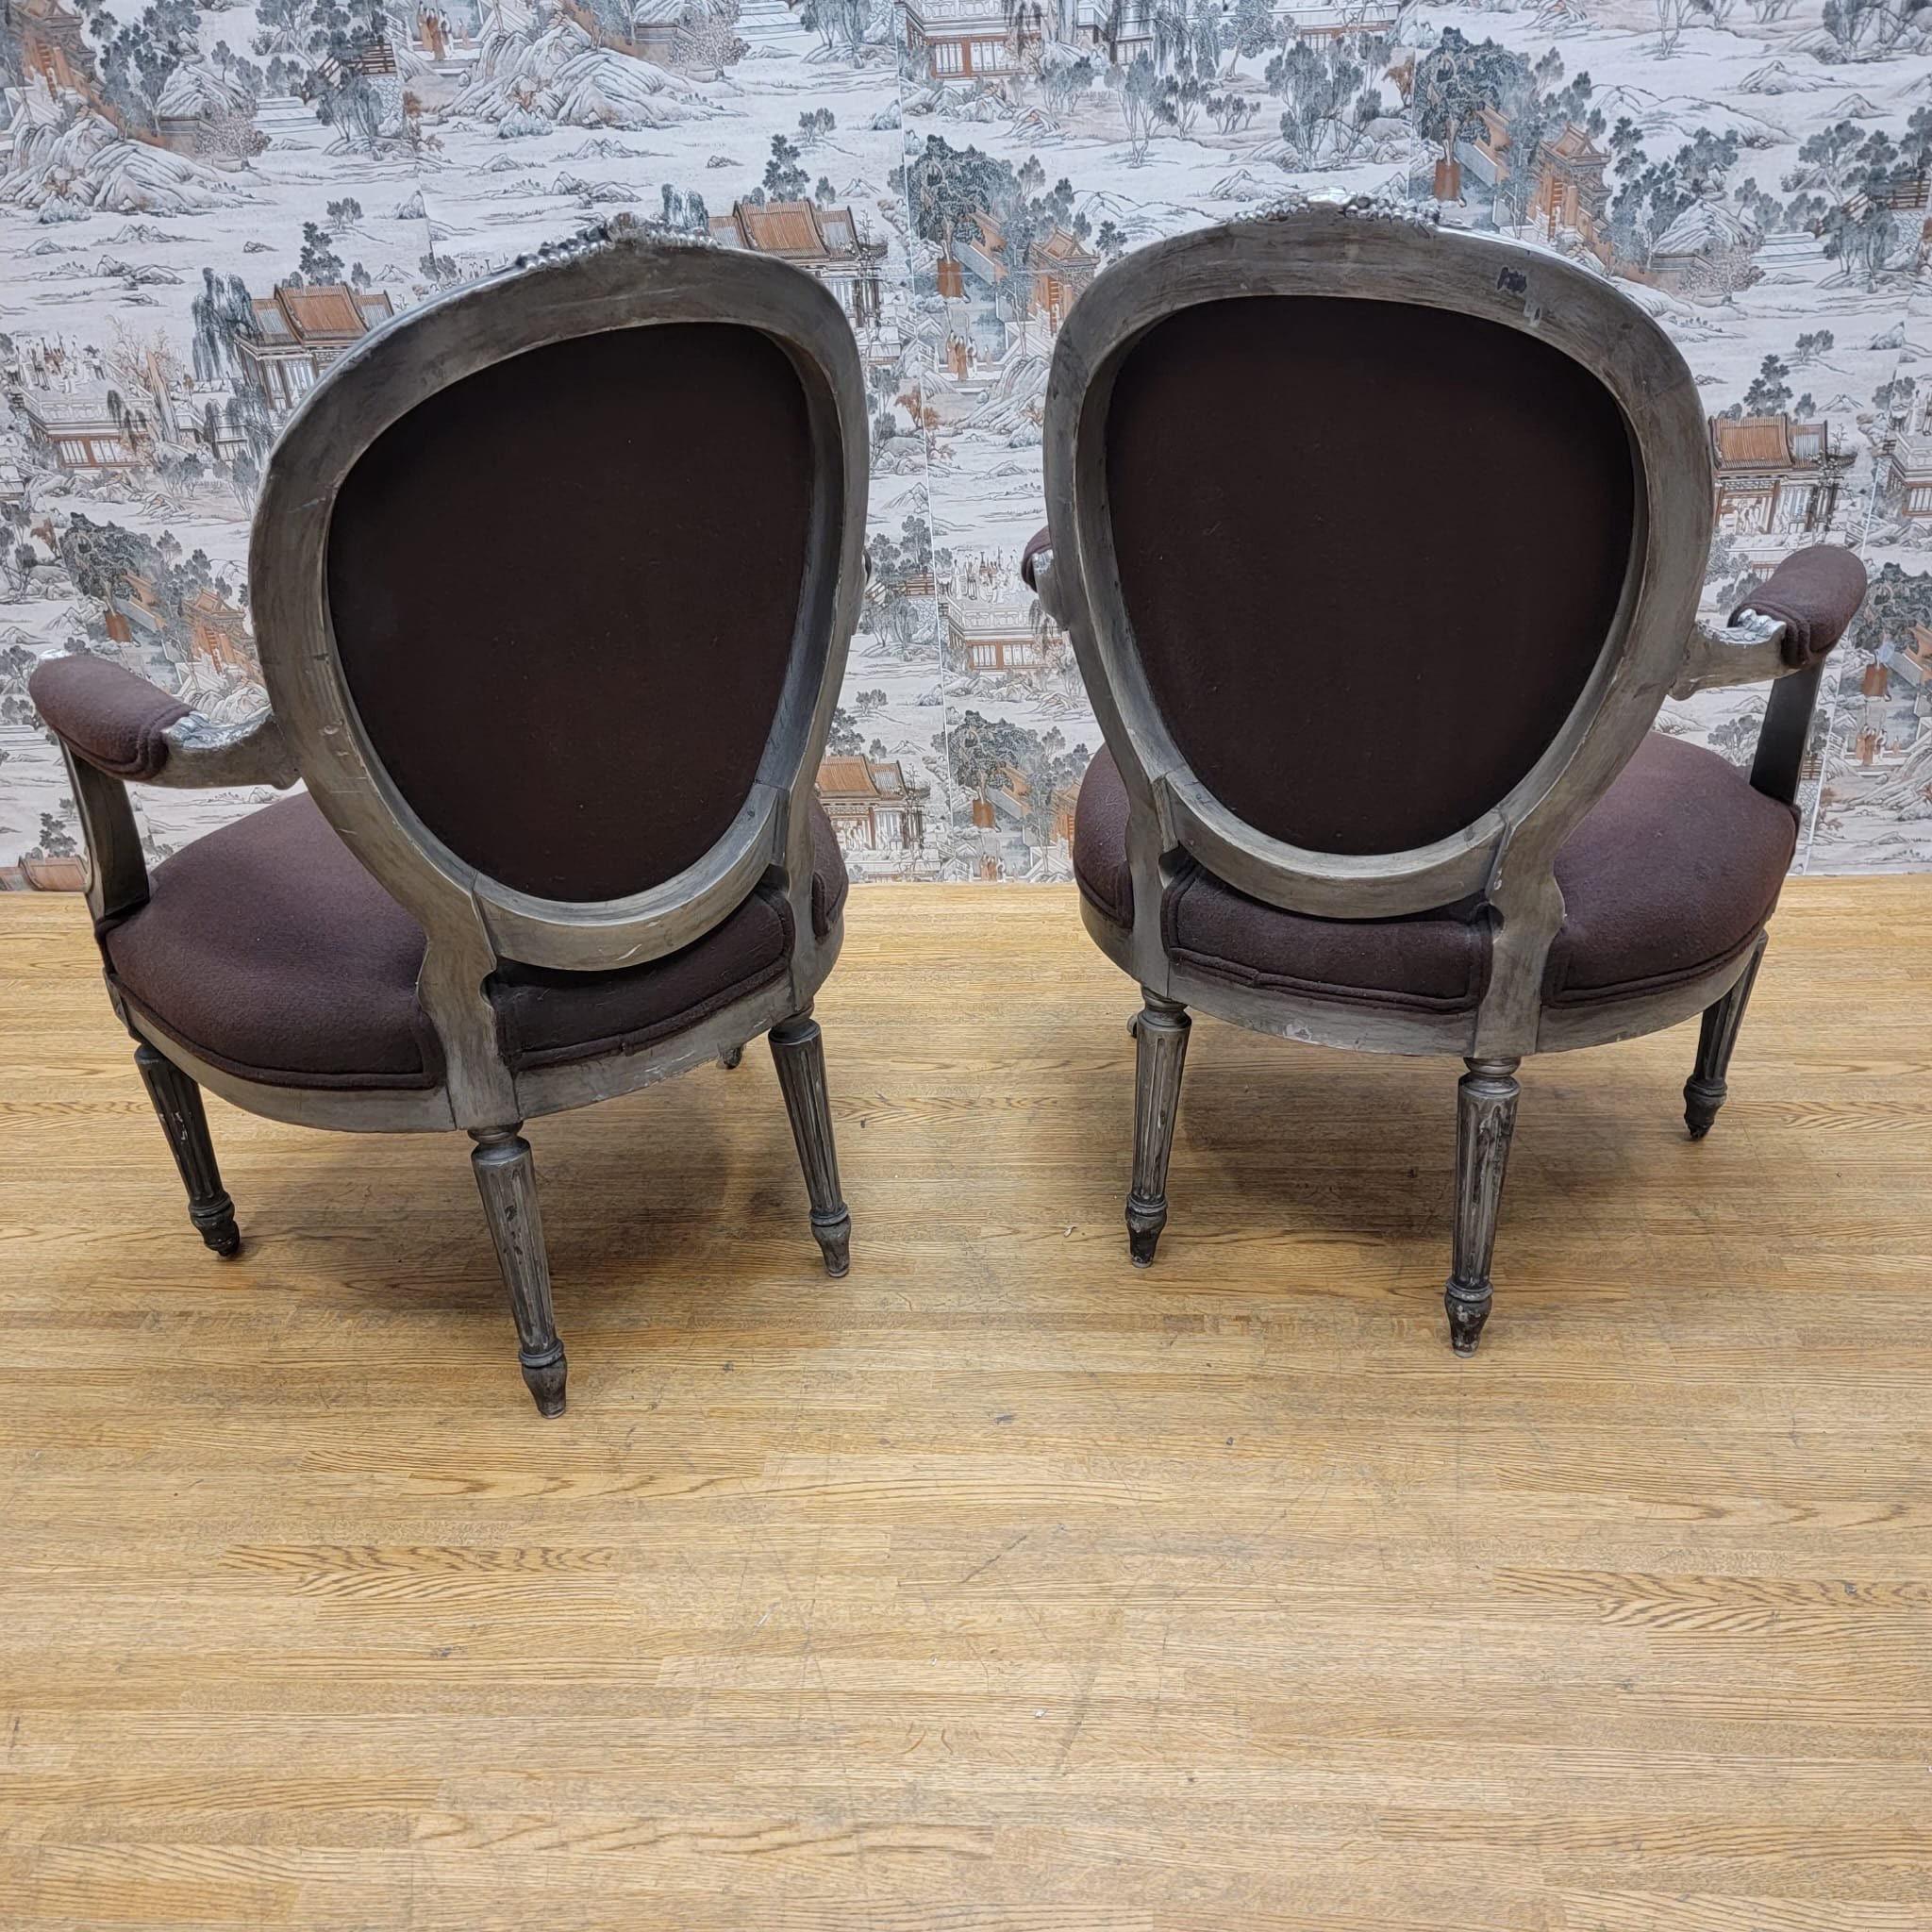 Antique French Louis XVI Hand Carved Silver Gilt Framed Fauteuil Armchairs-Pair In Good Condition For Sale In Chicago, IL